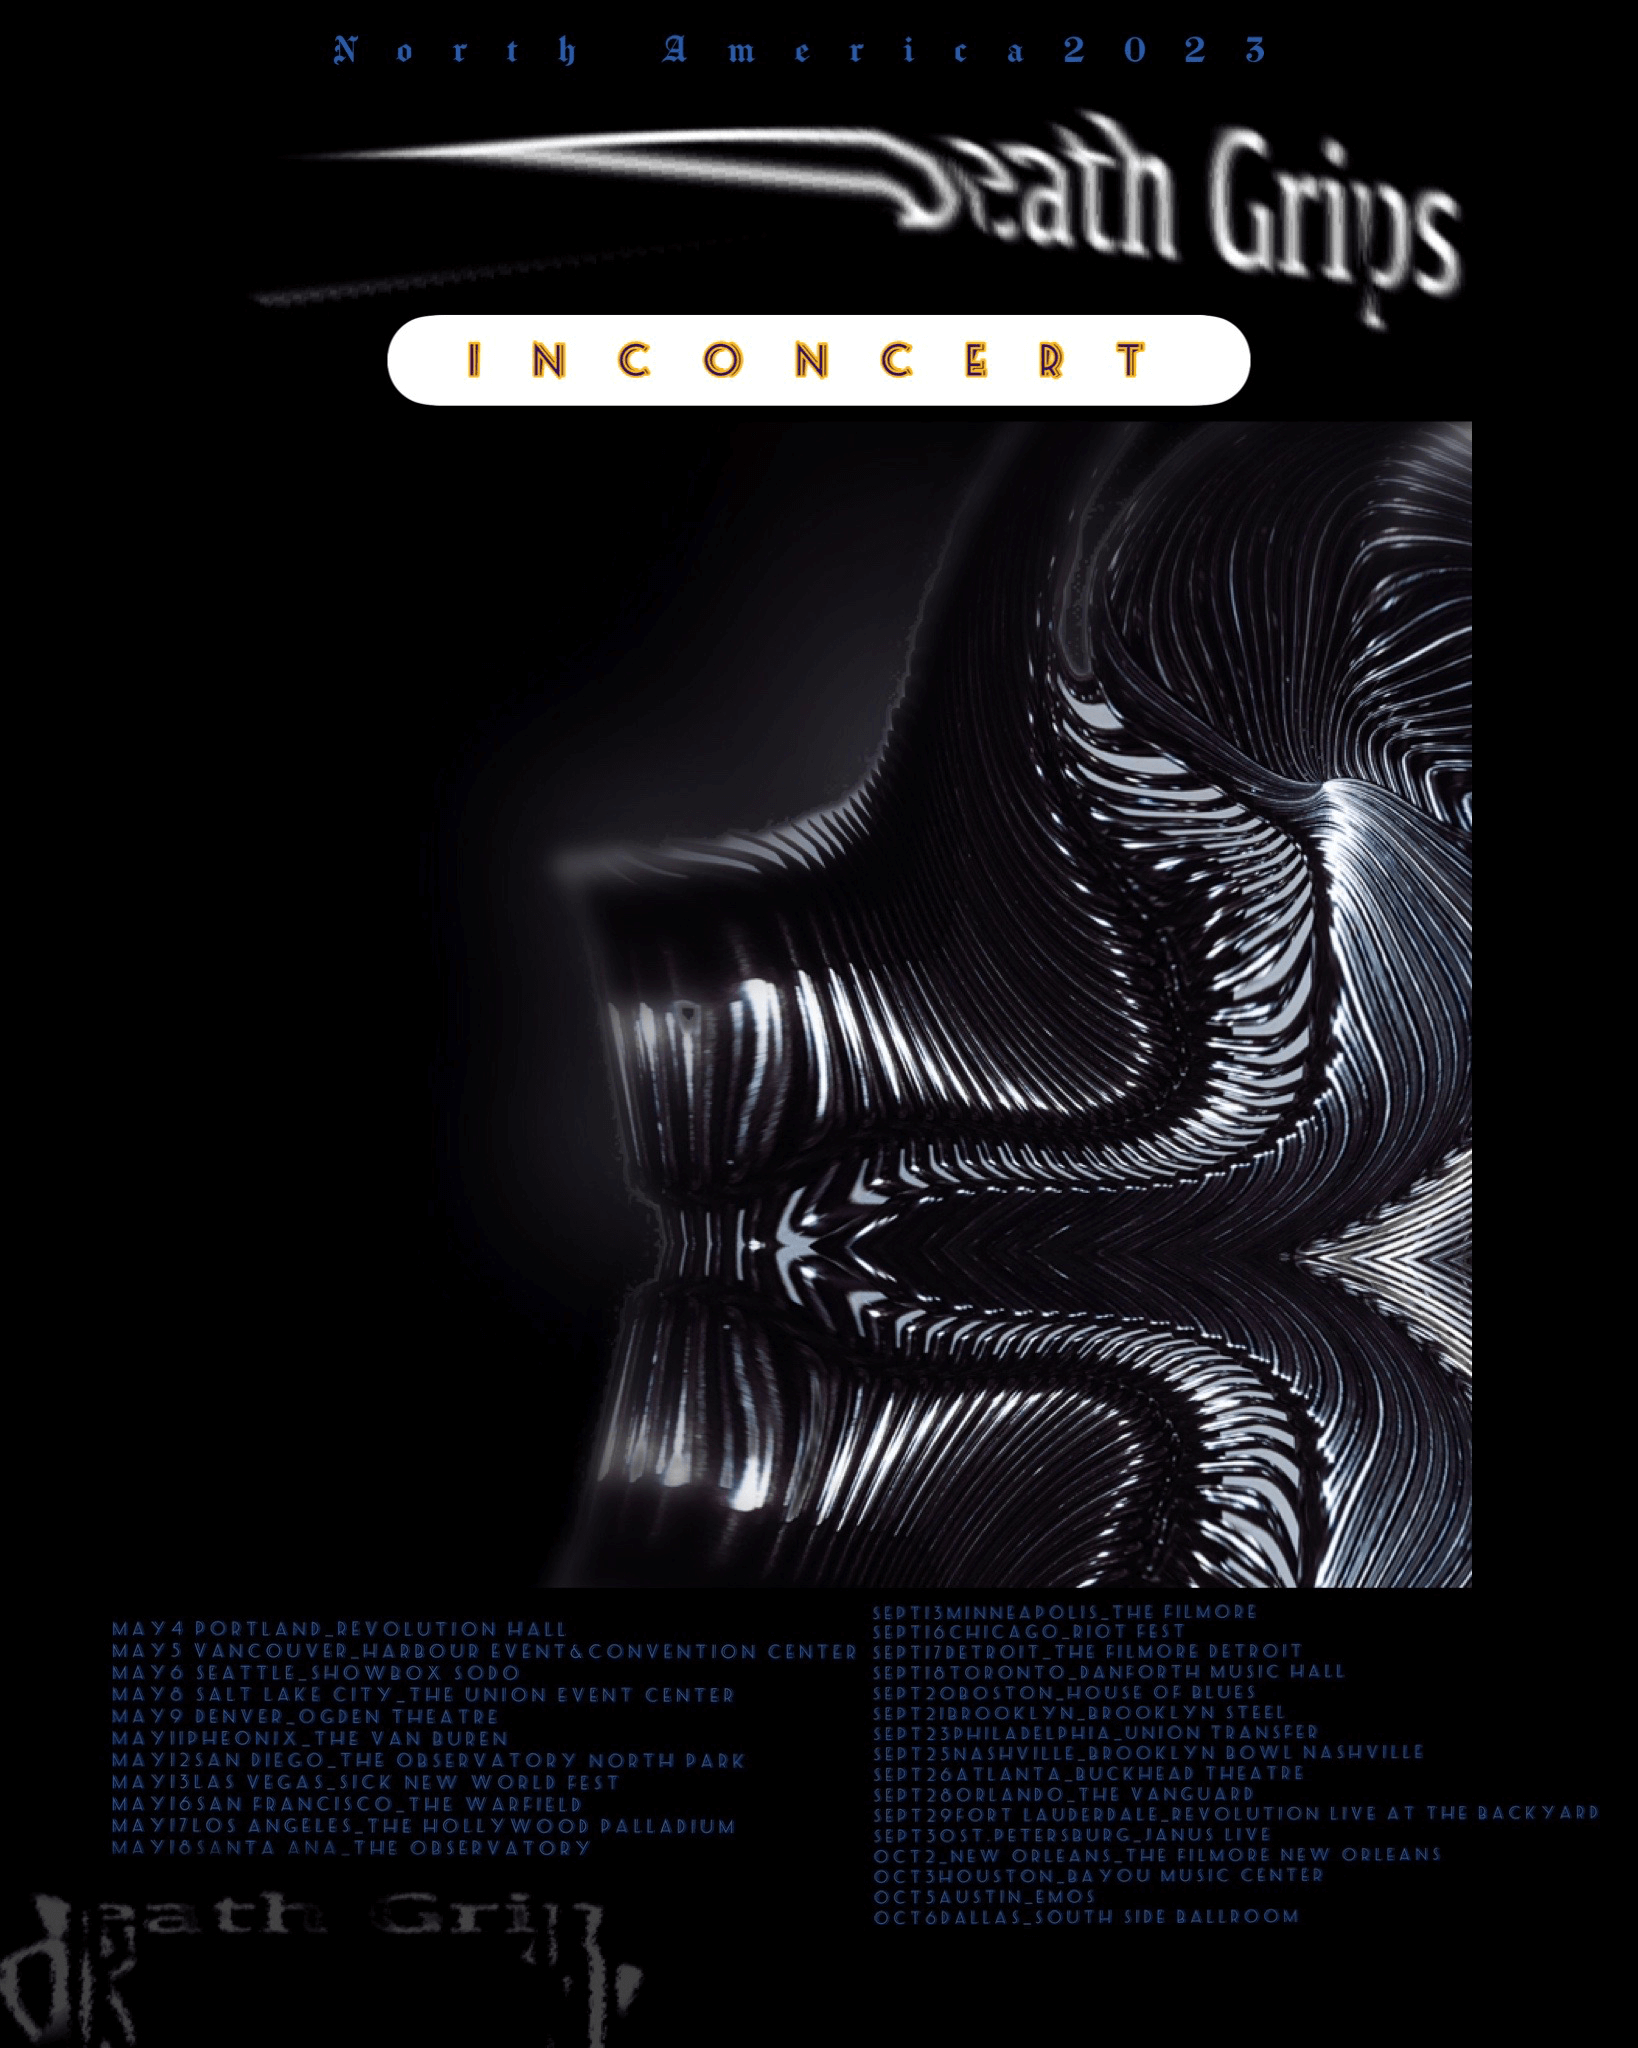 Death Grips 2023 North American Dates